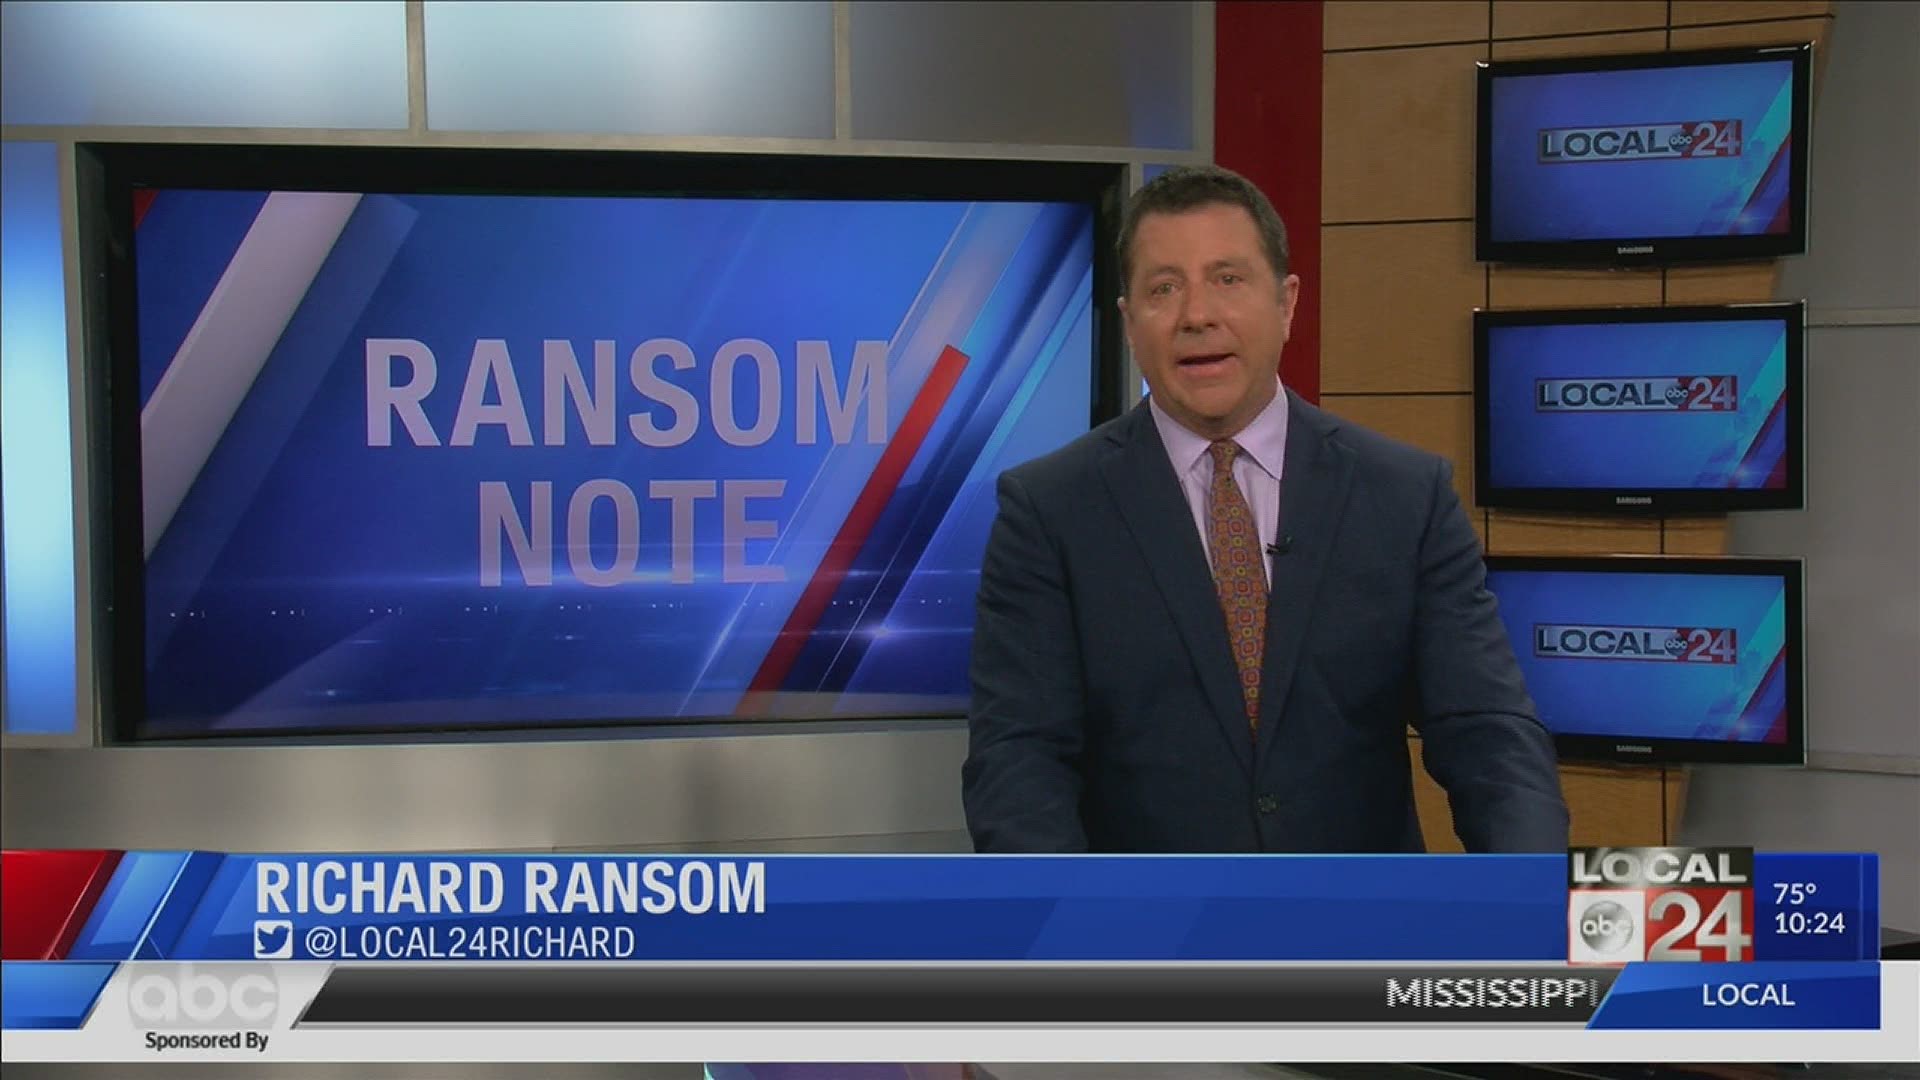 Local 24 News anchor Richard Ransom takes a look at the results of a new Gallup poll in his Ransom Note.